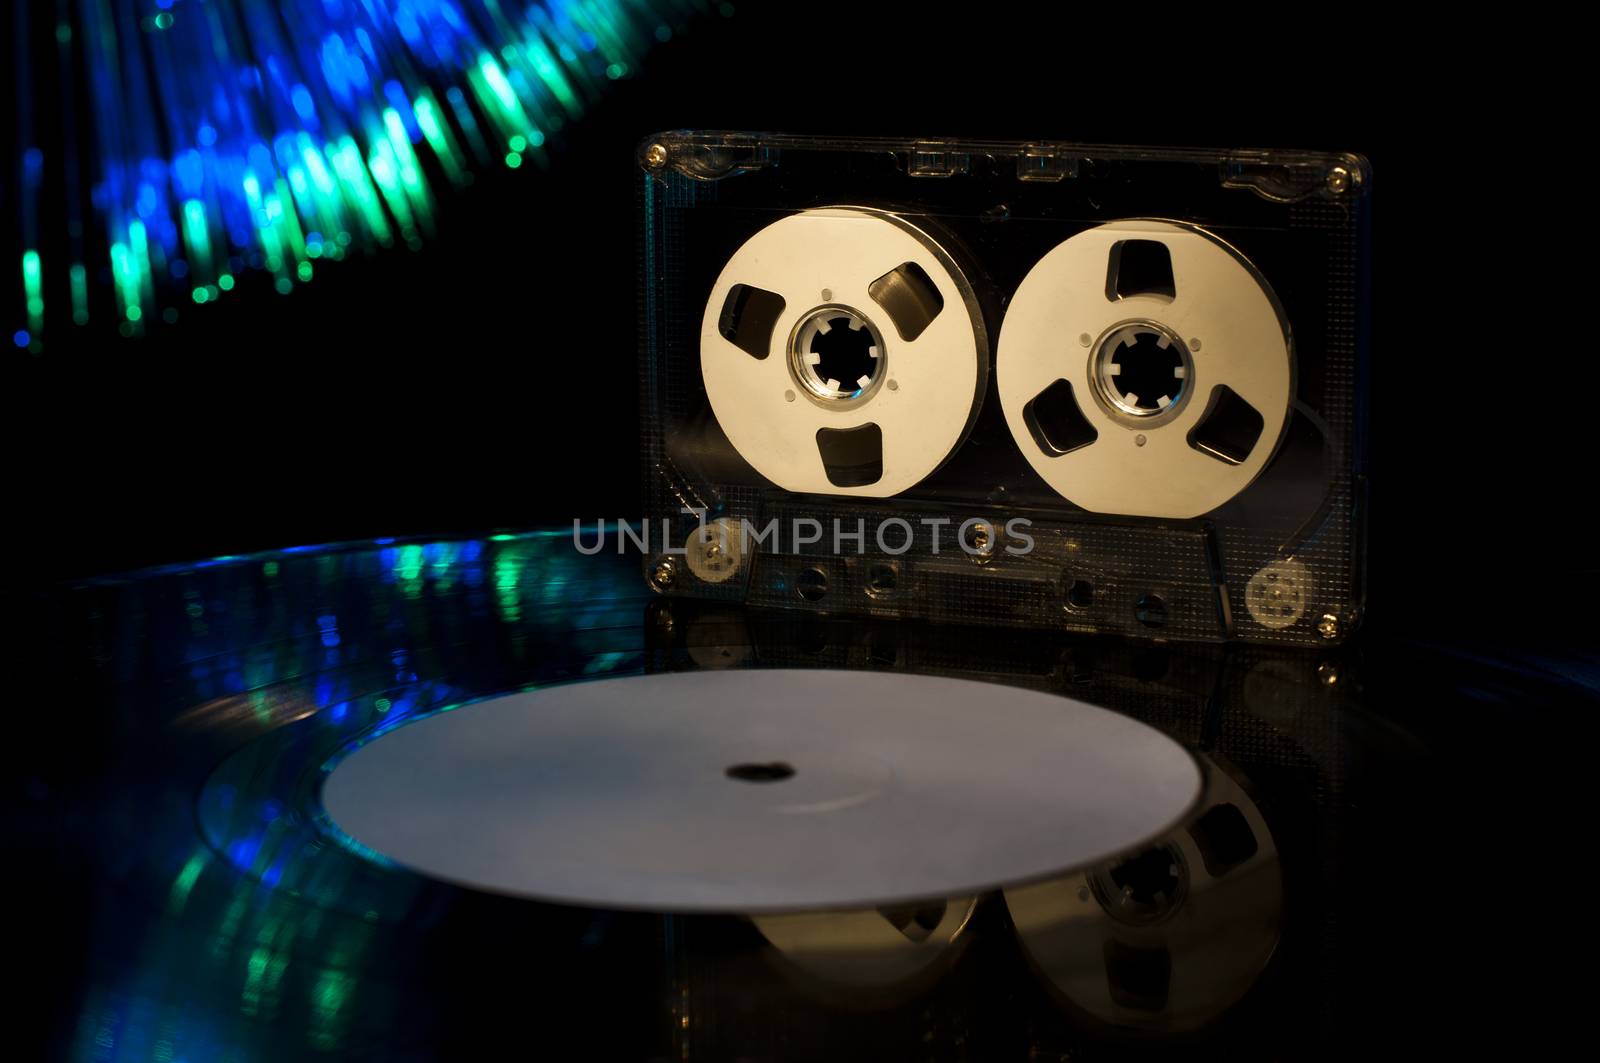 LP vinyl record, cassette tape and disco lights on background